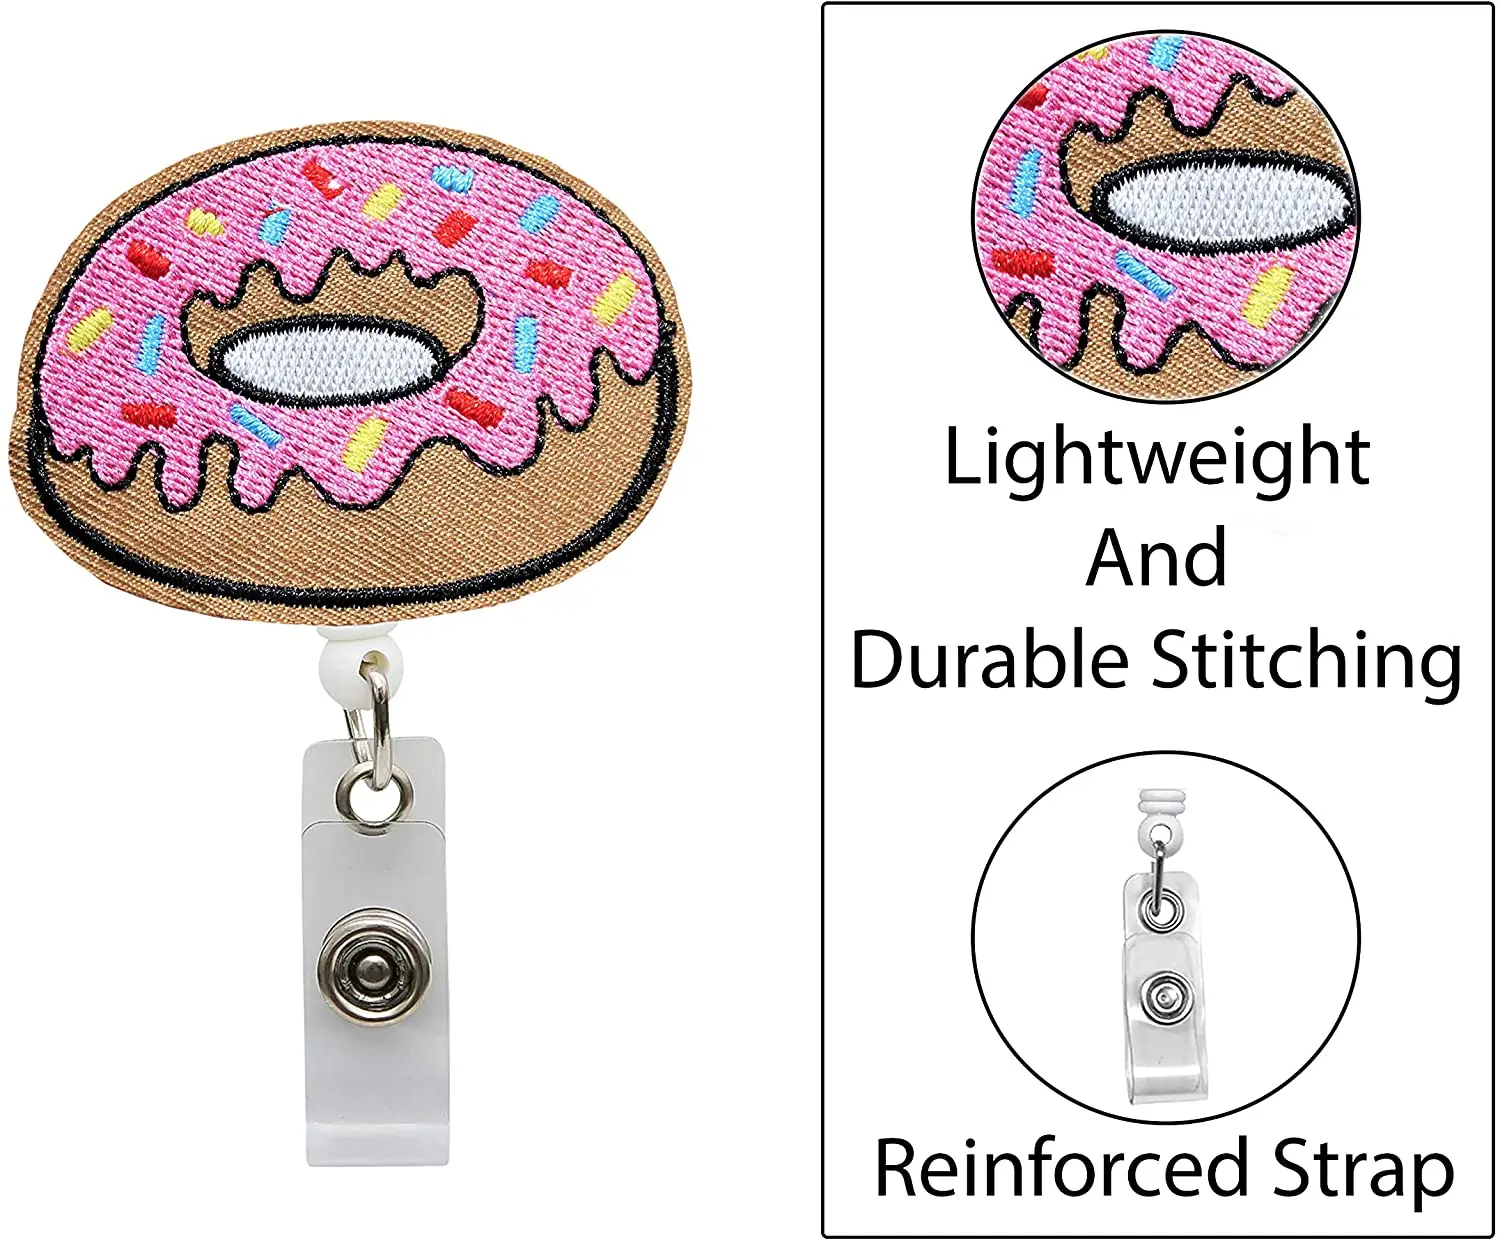 Pink Donut Nurse Badge Reel - RN Retractable ID Holder with Alligator Clip for Hospitals Doctors and Office Staff